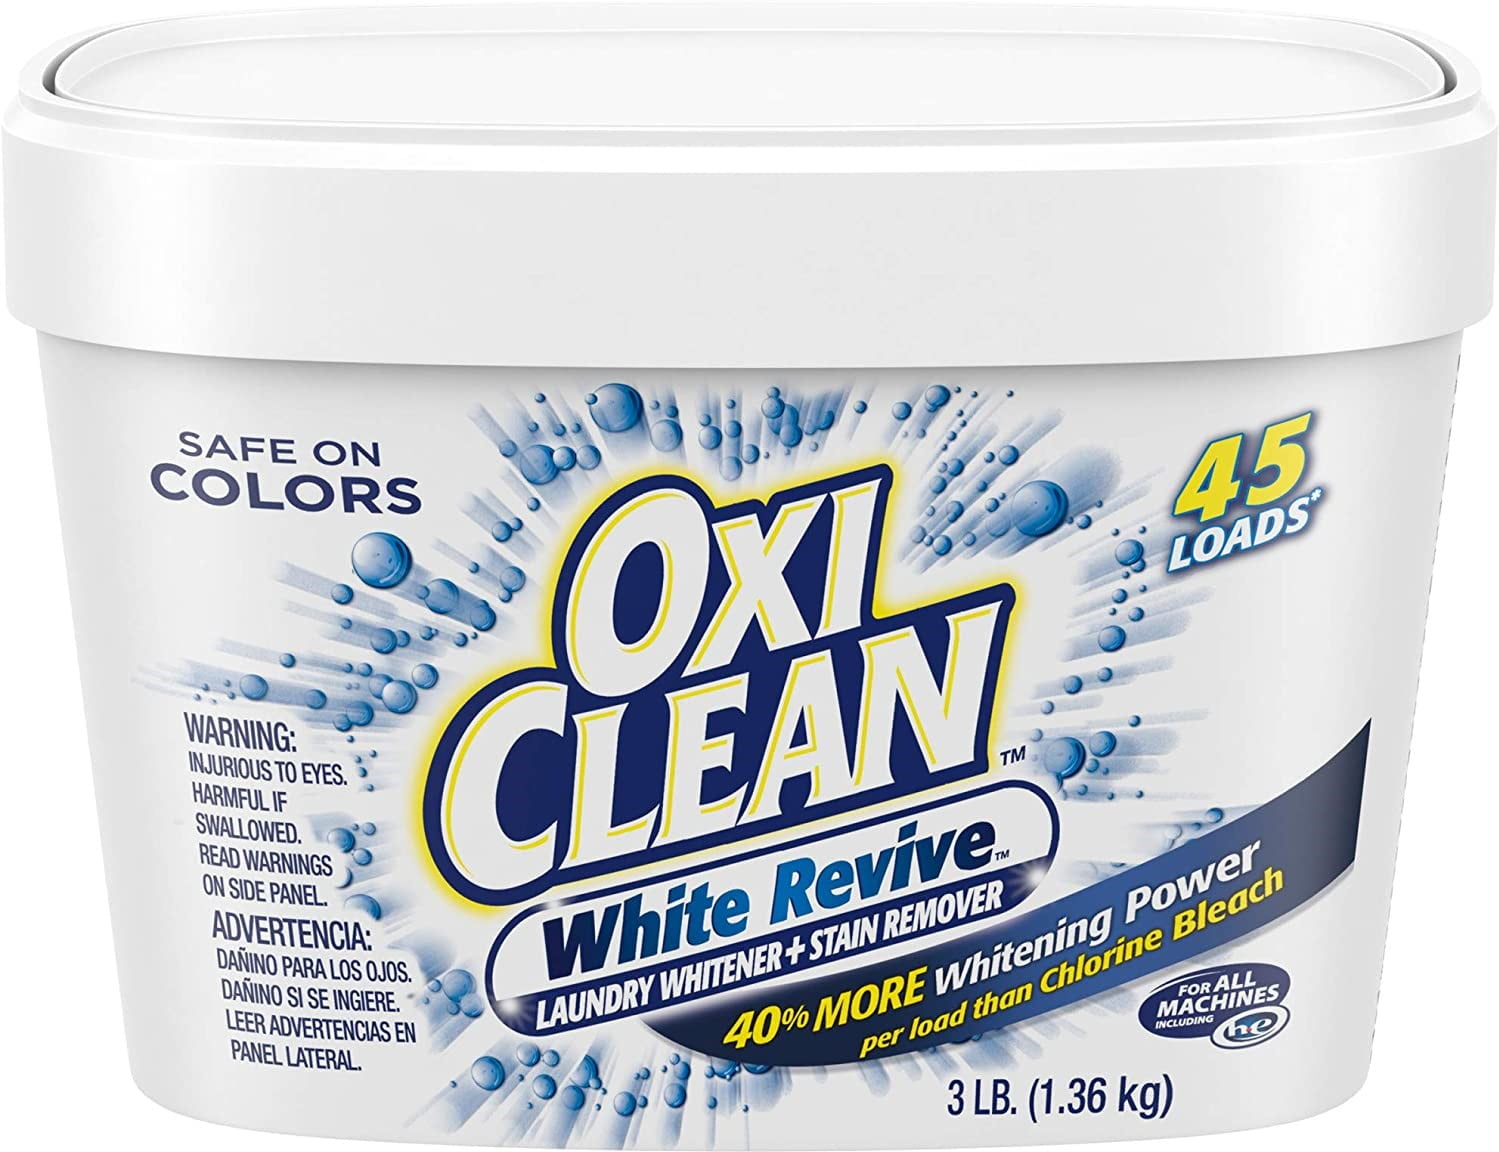 Stain Remover 5 lbs 5 Pounds OxiClean White Revive Laundry Whitener 